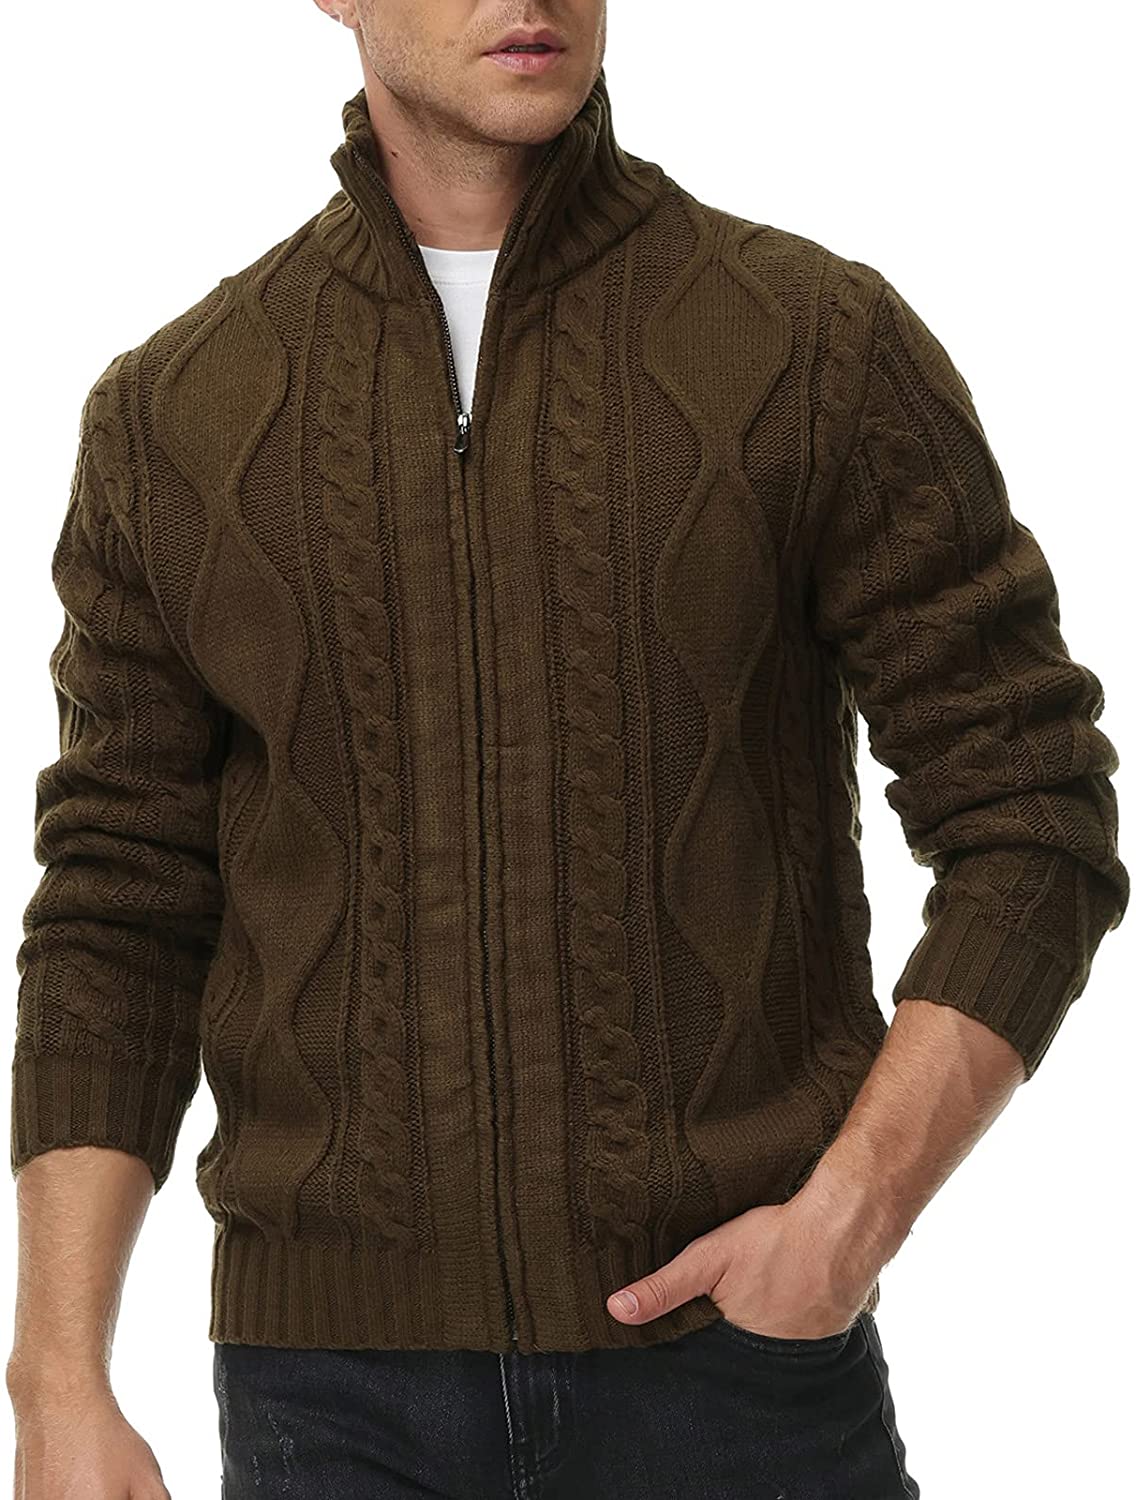 PAUL JONES Mens Stylish Stand Collar Cable Knitted Button Cardigan Sweater